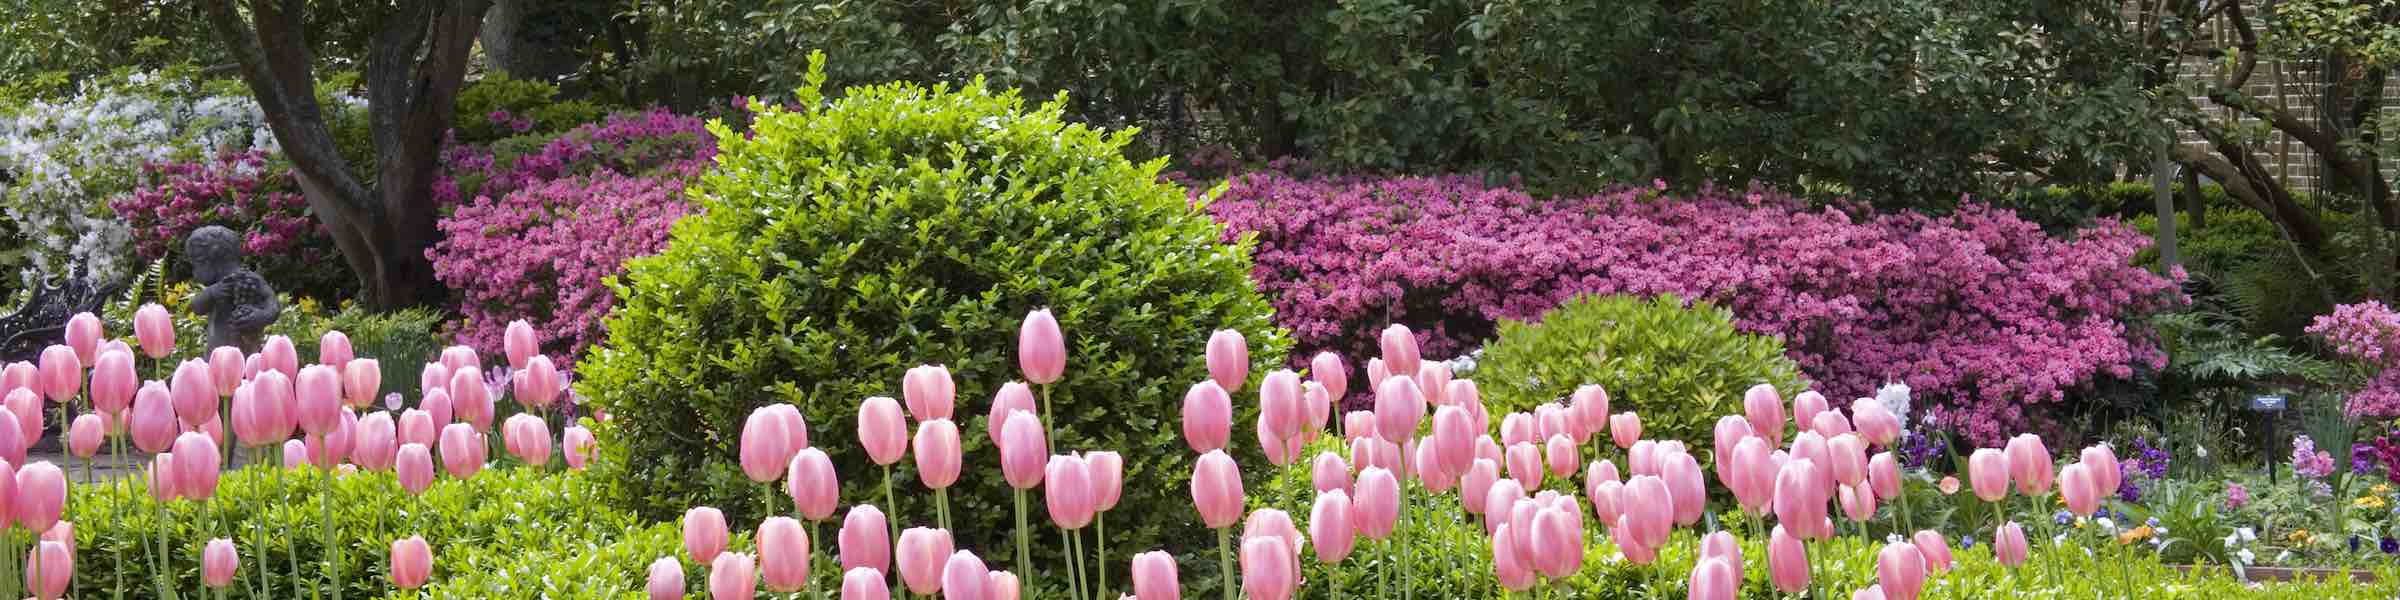 Pink tulips and other plantings in the garden at the Nathaniel-Russell House, Charleston, SC.